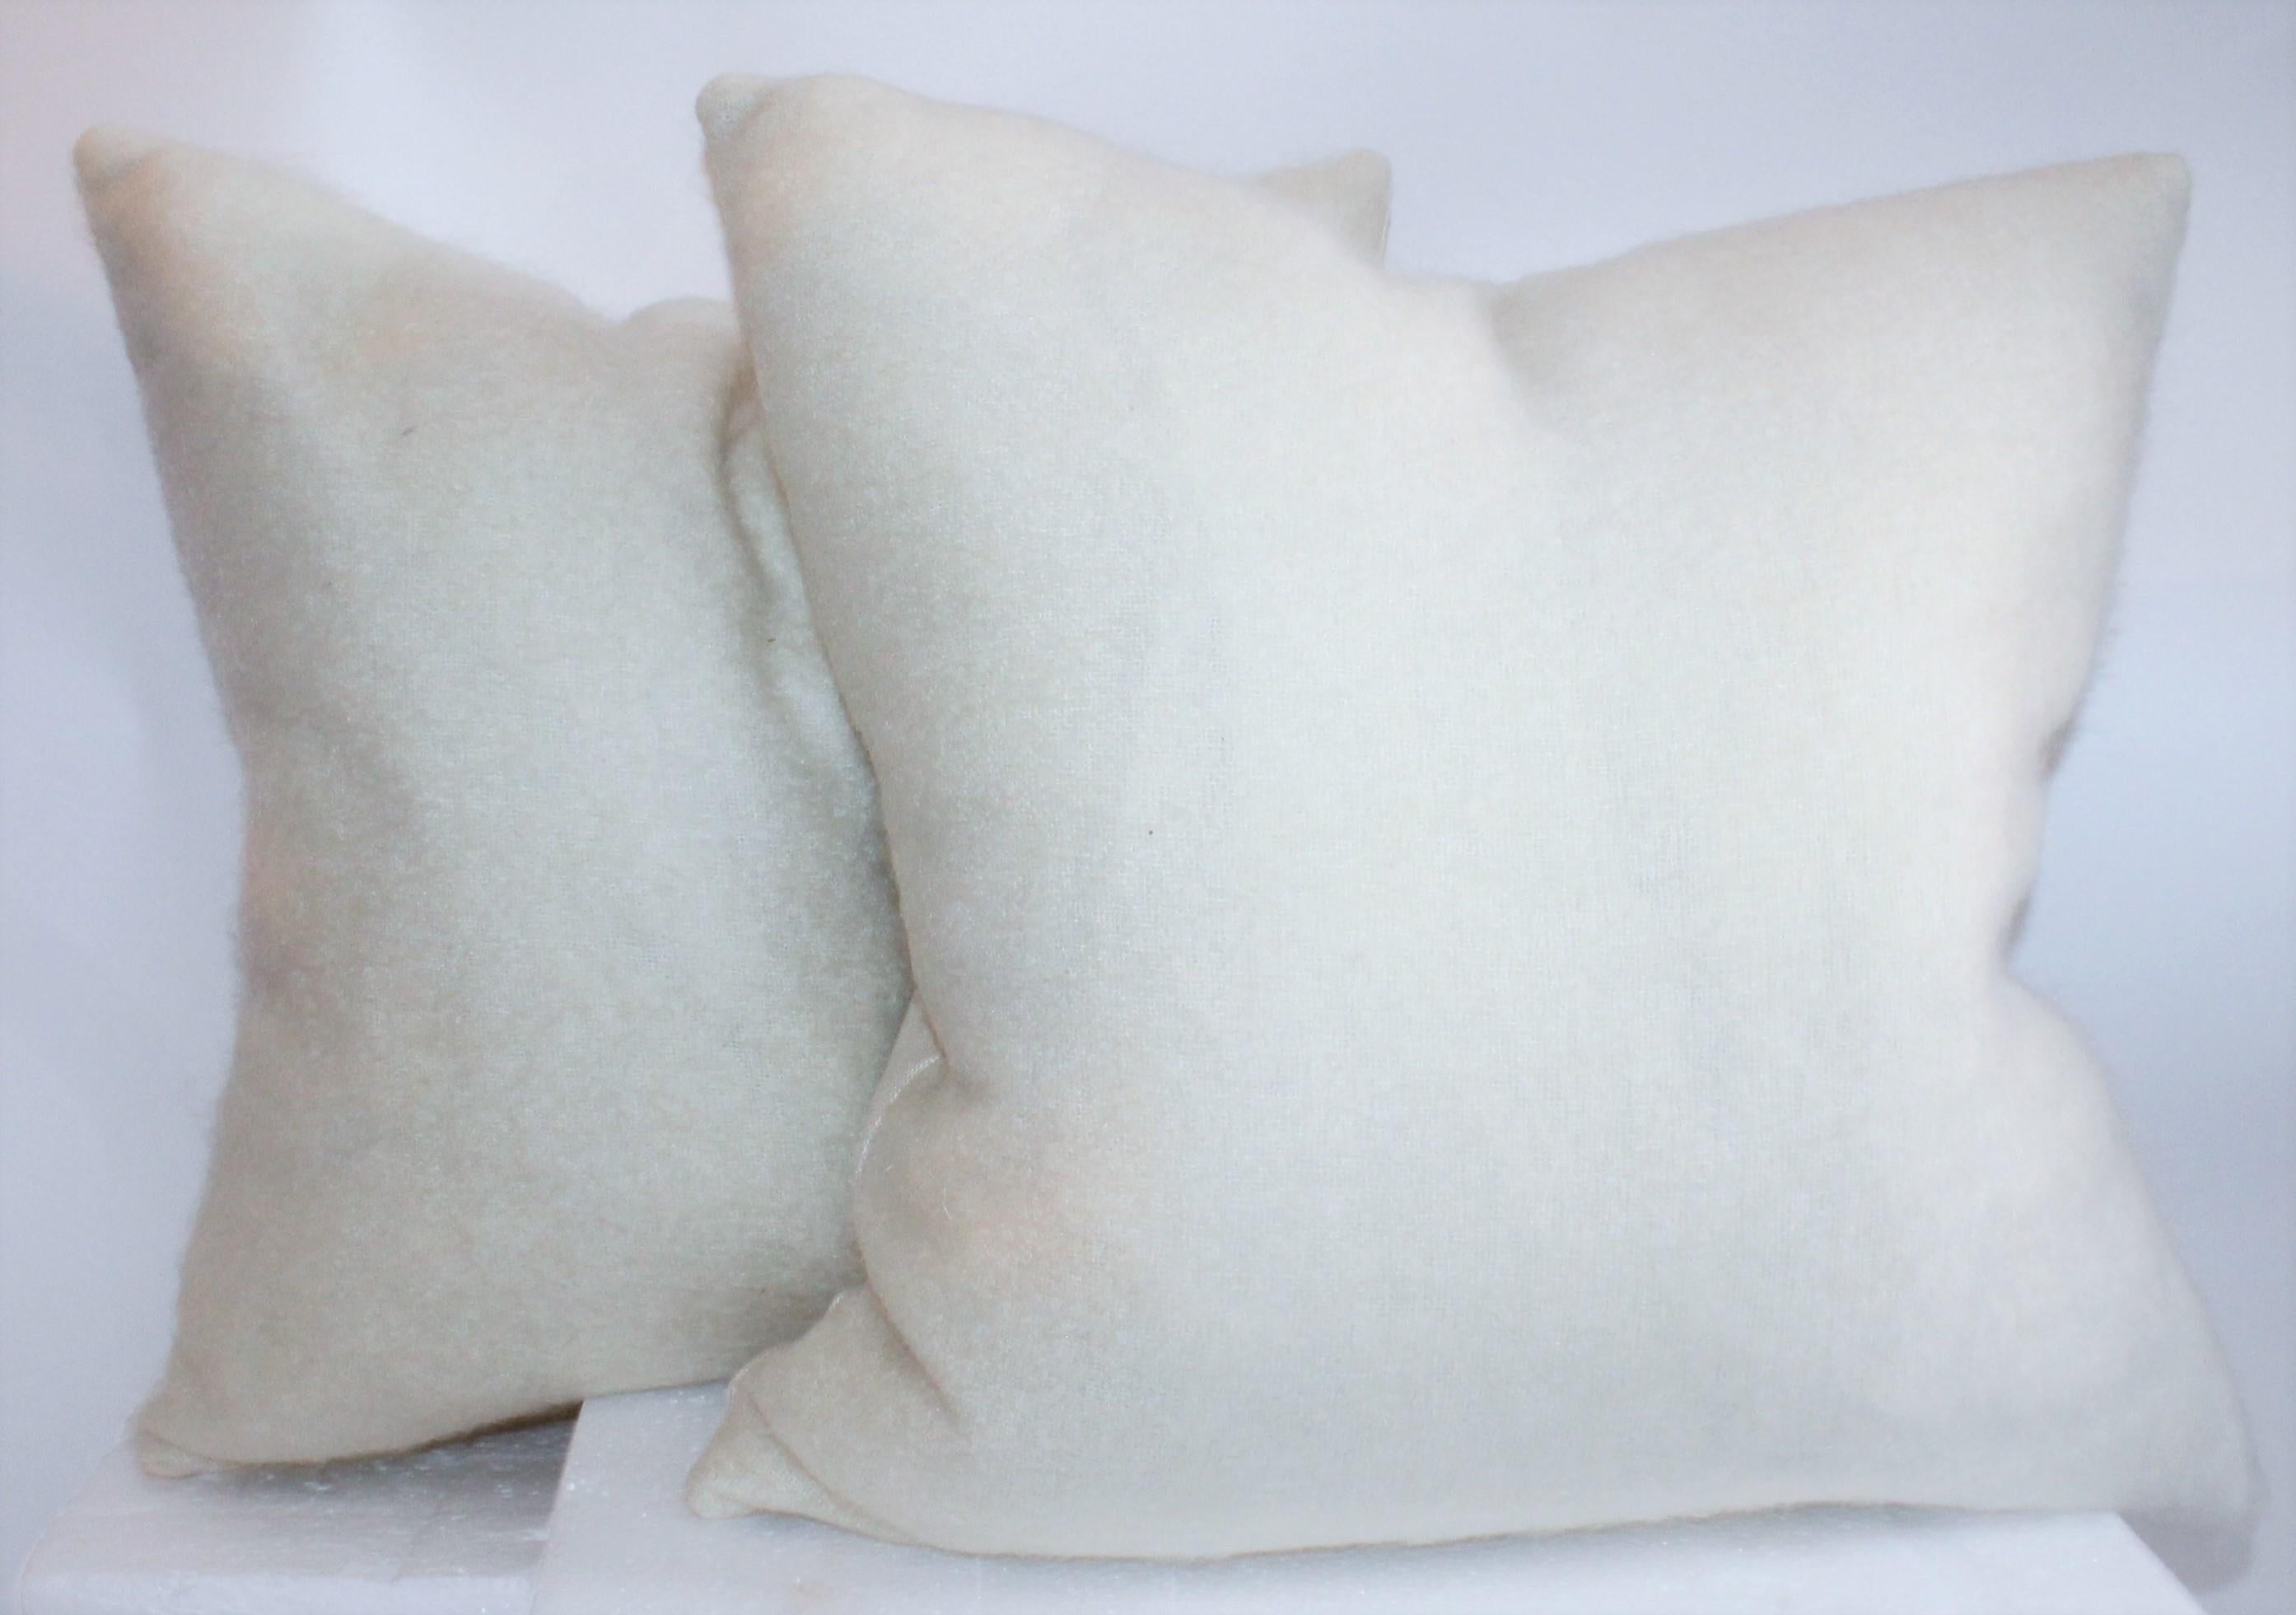 These amazing handmade lambs wool pillows are in Fine condition with cotton linen backings. The inserts are down and feather fill. 

1 pair of 22 x 22 / 1 pair of 20 x 20 ( Total two pairs).